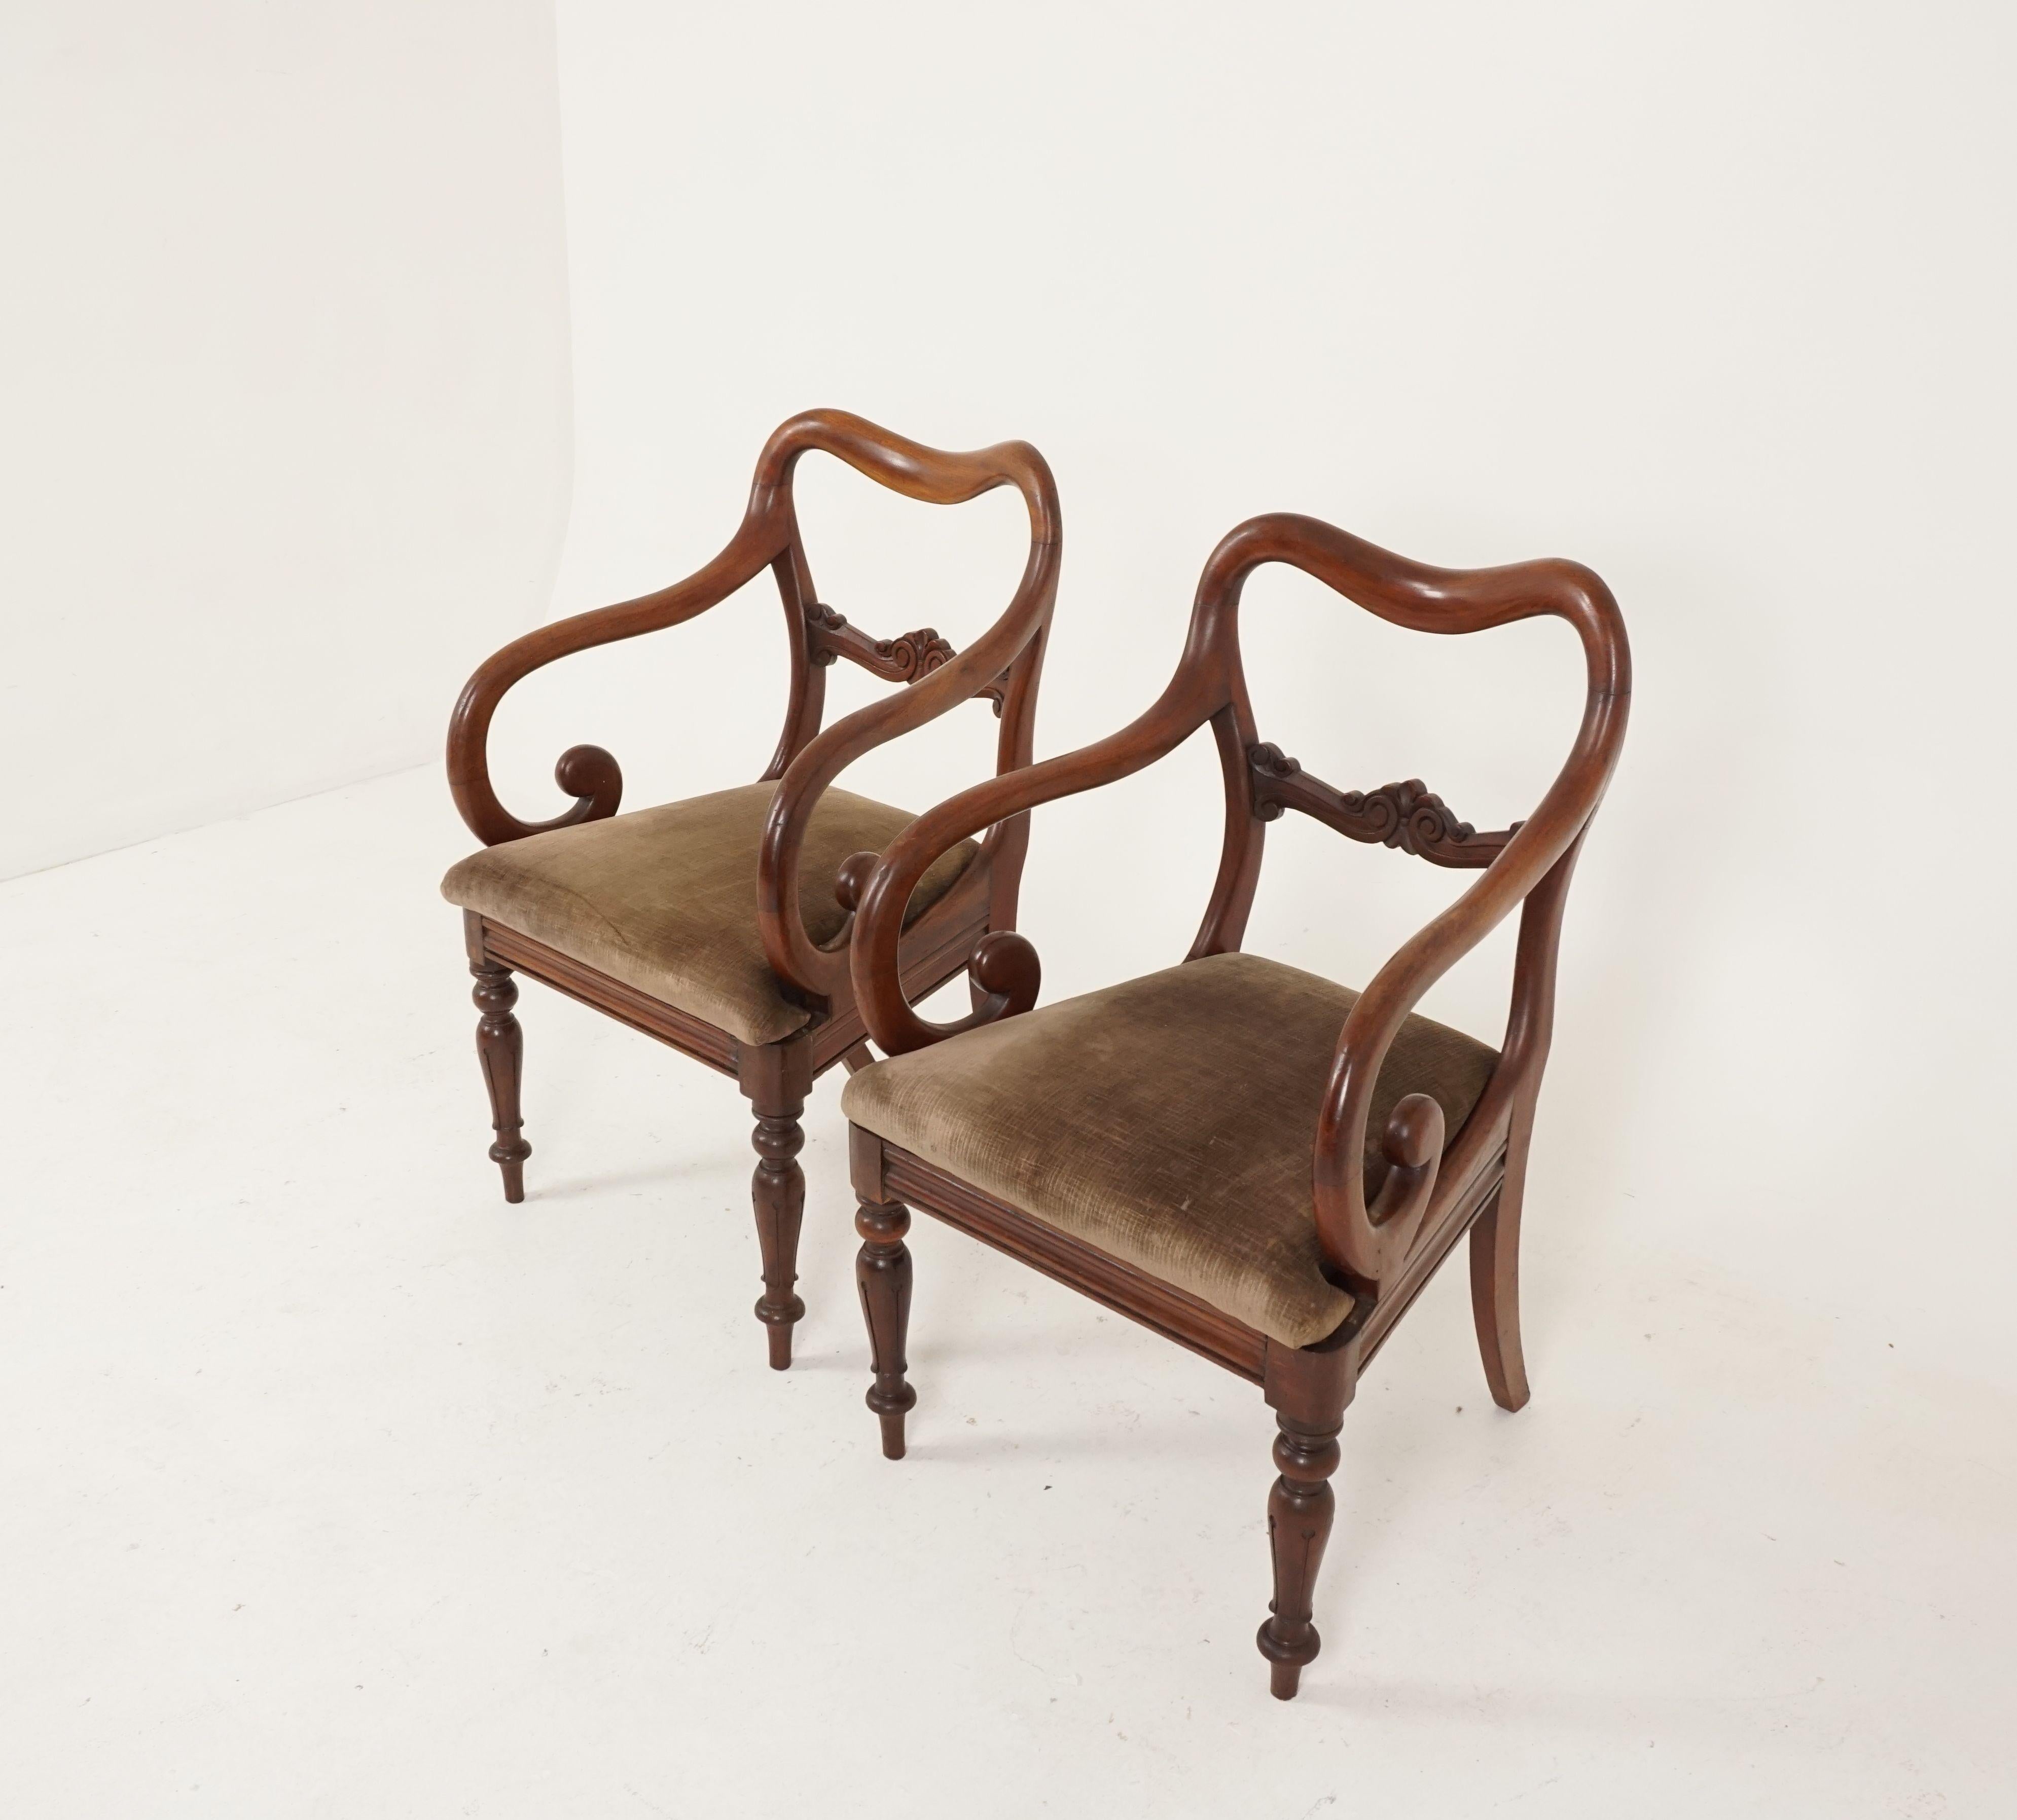 Pair of antique armchairs, Victorian mahogany dining armchairs, library chairs, Scotland, 1840, B2473

Scotland 1840
Solid mahogany
Original finish
Kidney shaped back
Lovely carved splat
Nicely shaped scroll arm
Lift out seat with